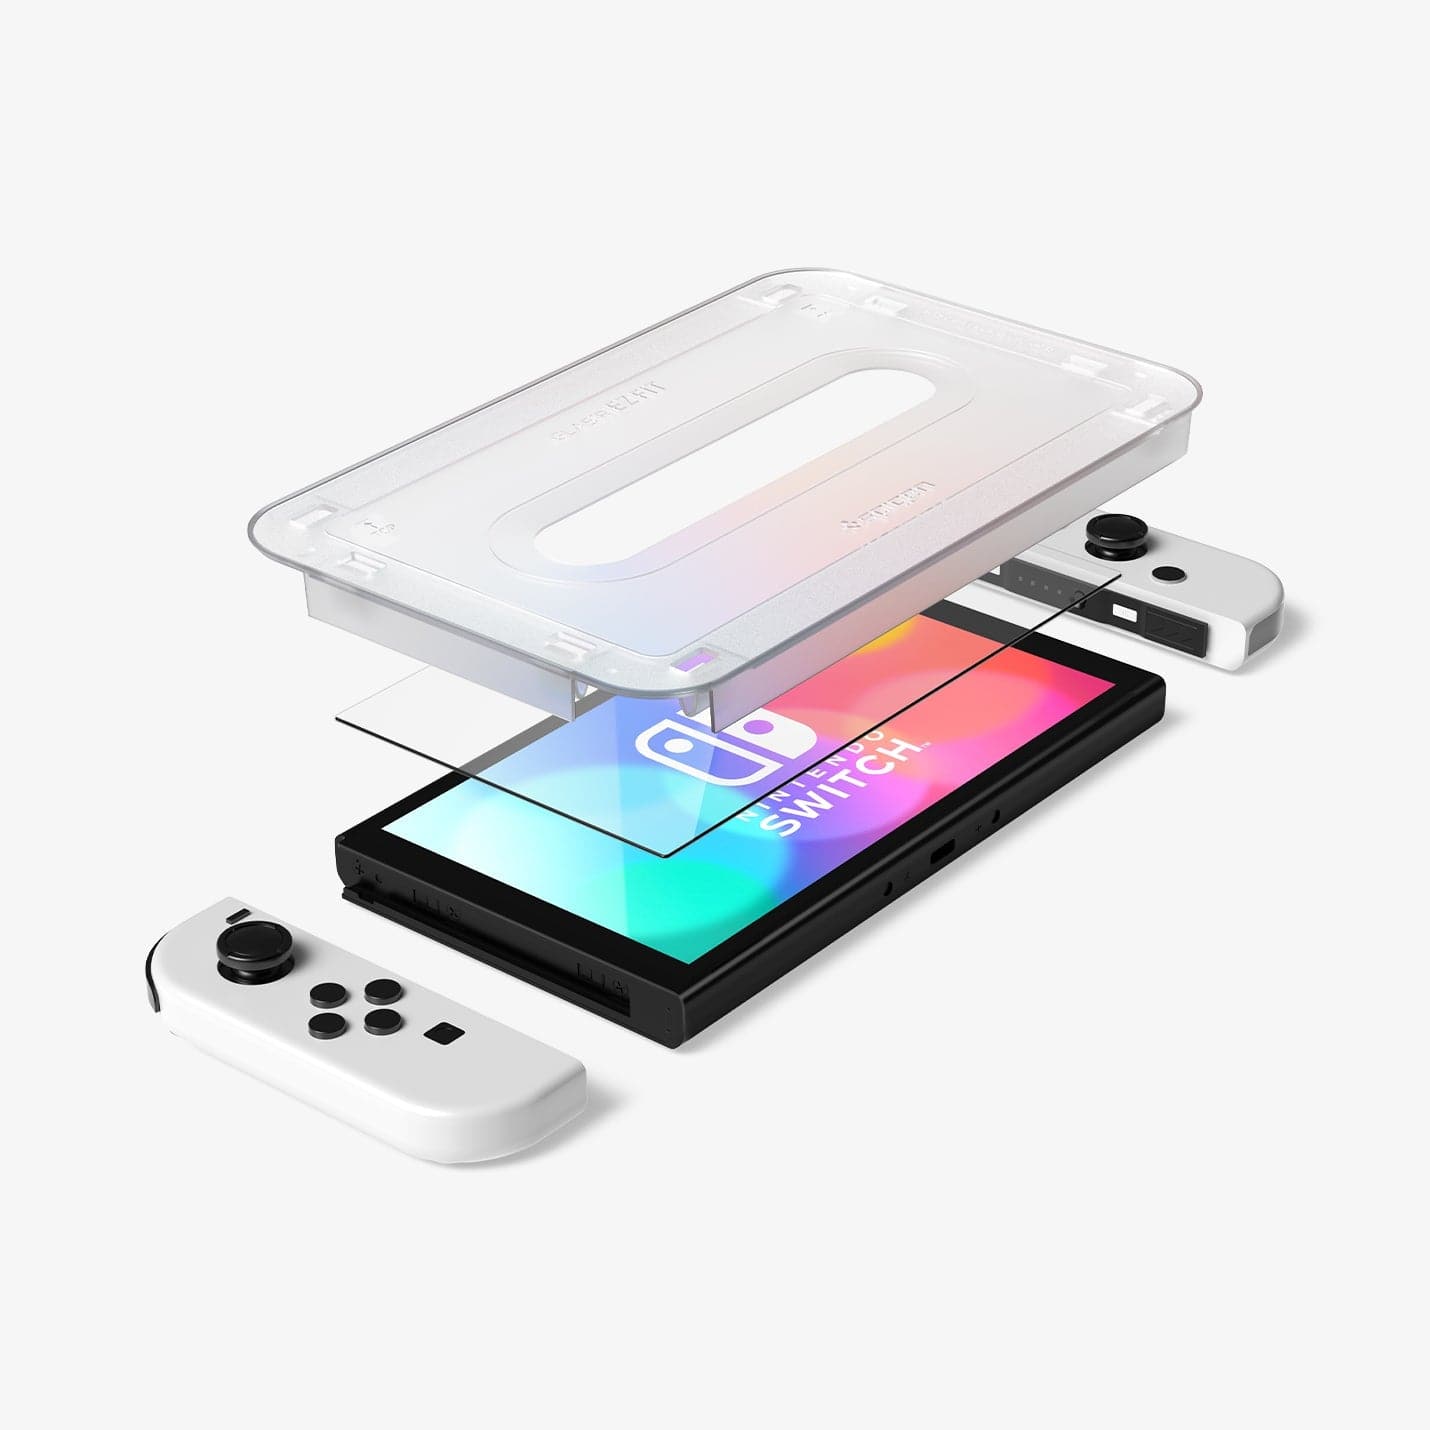 AGL03829 - Nintendo Switch OLED Screen Protector EZ Fit GLAS.tR showing the ez fit tray and screen protector hovering above the device